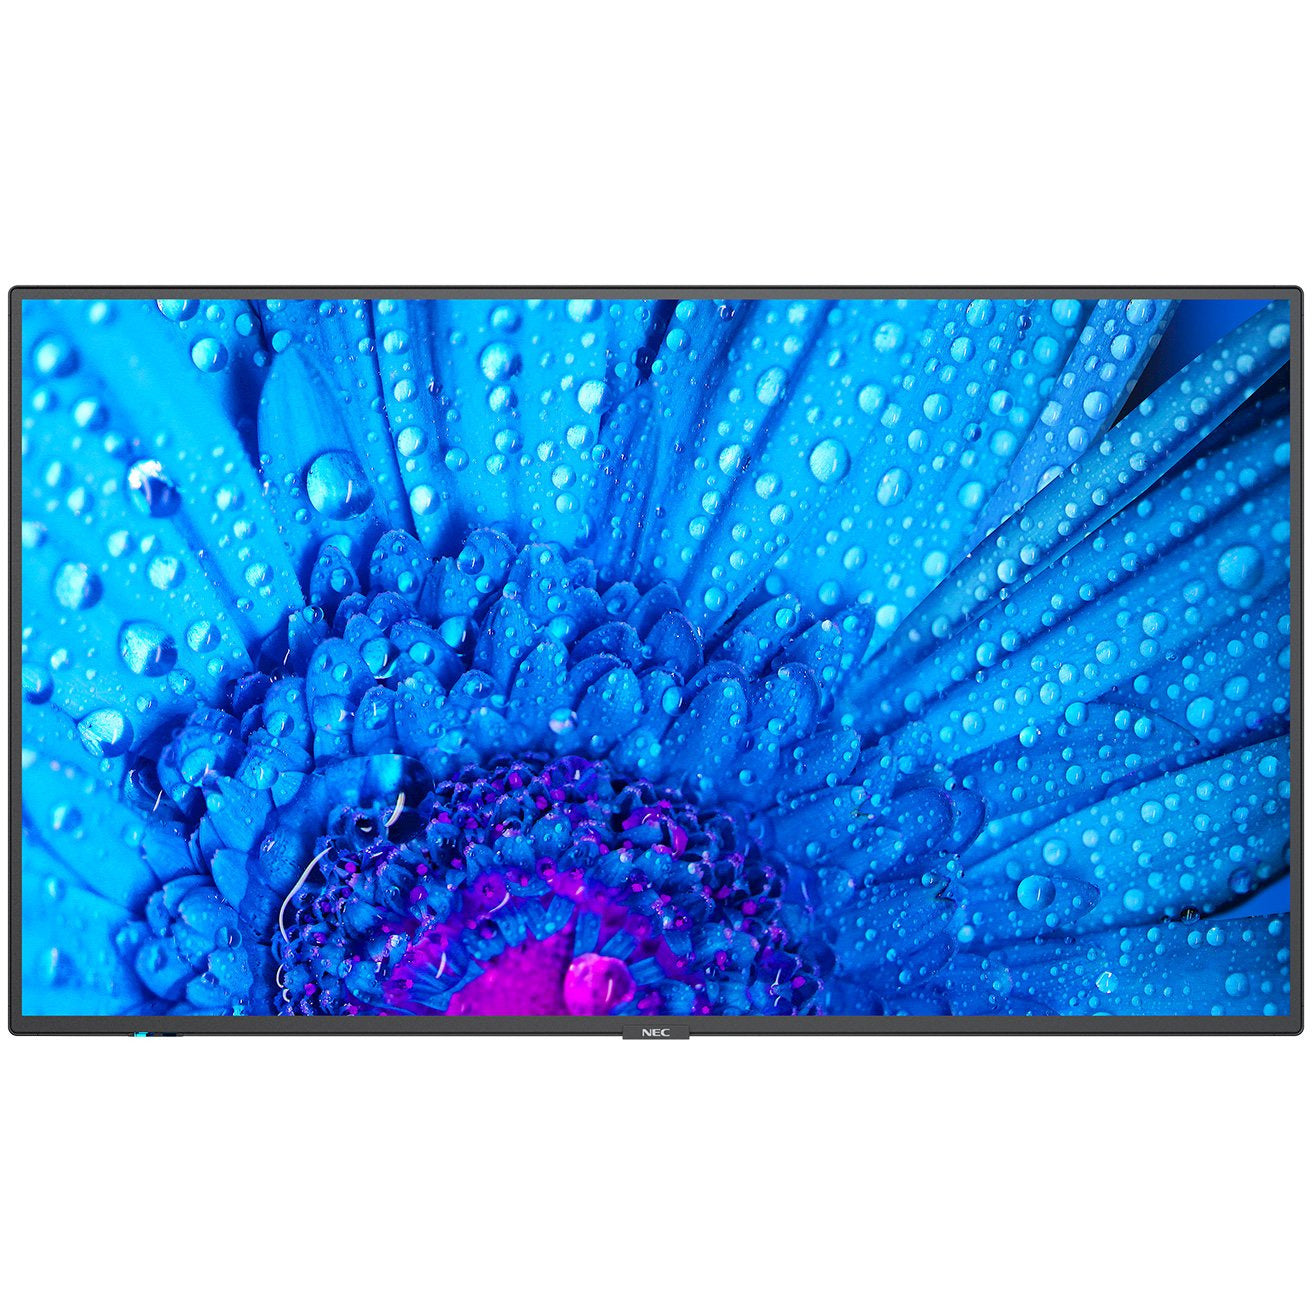 NEC MultiSync® M651 LCD 65" Message Large Format Display